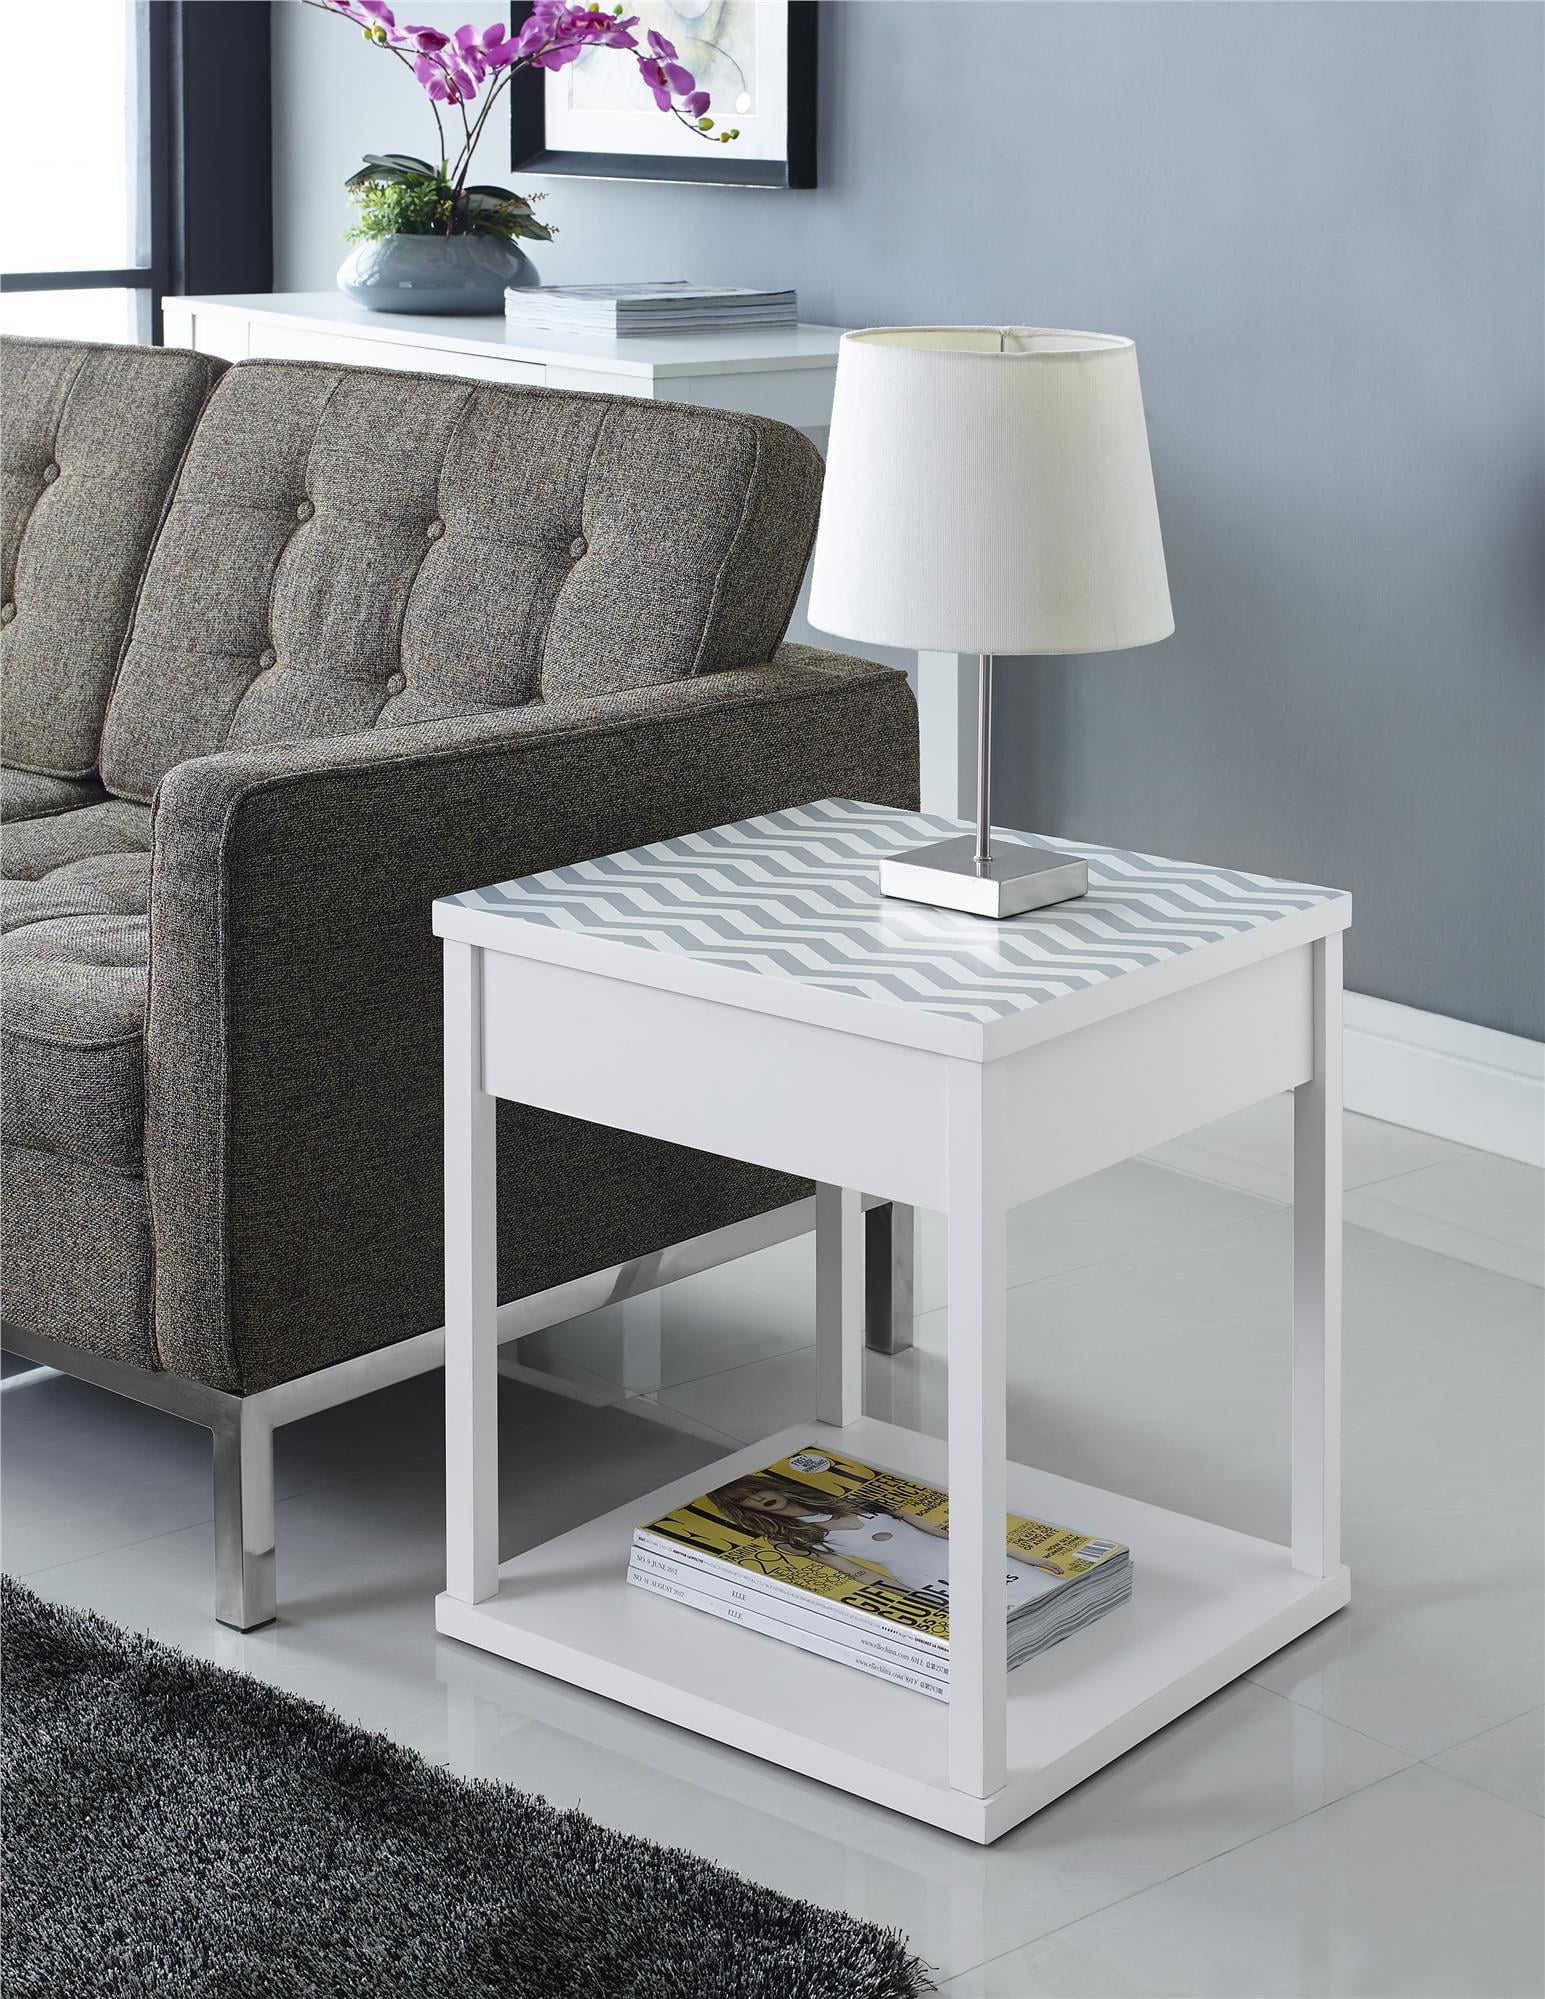 Mainstays Parsons End Table with Drawer, Multiple Colors - Walmart.com